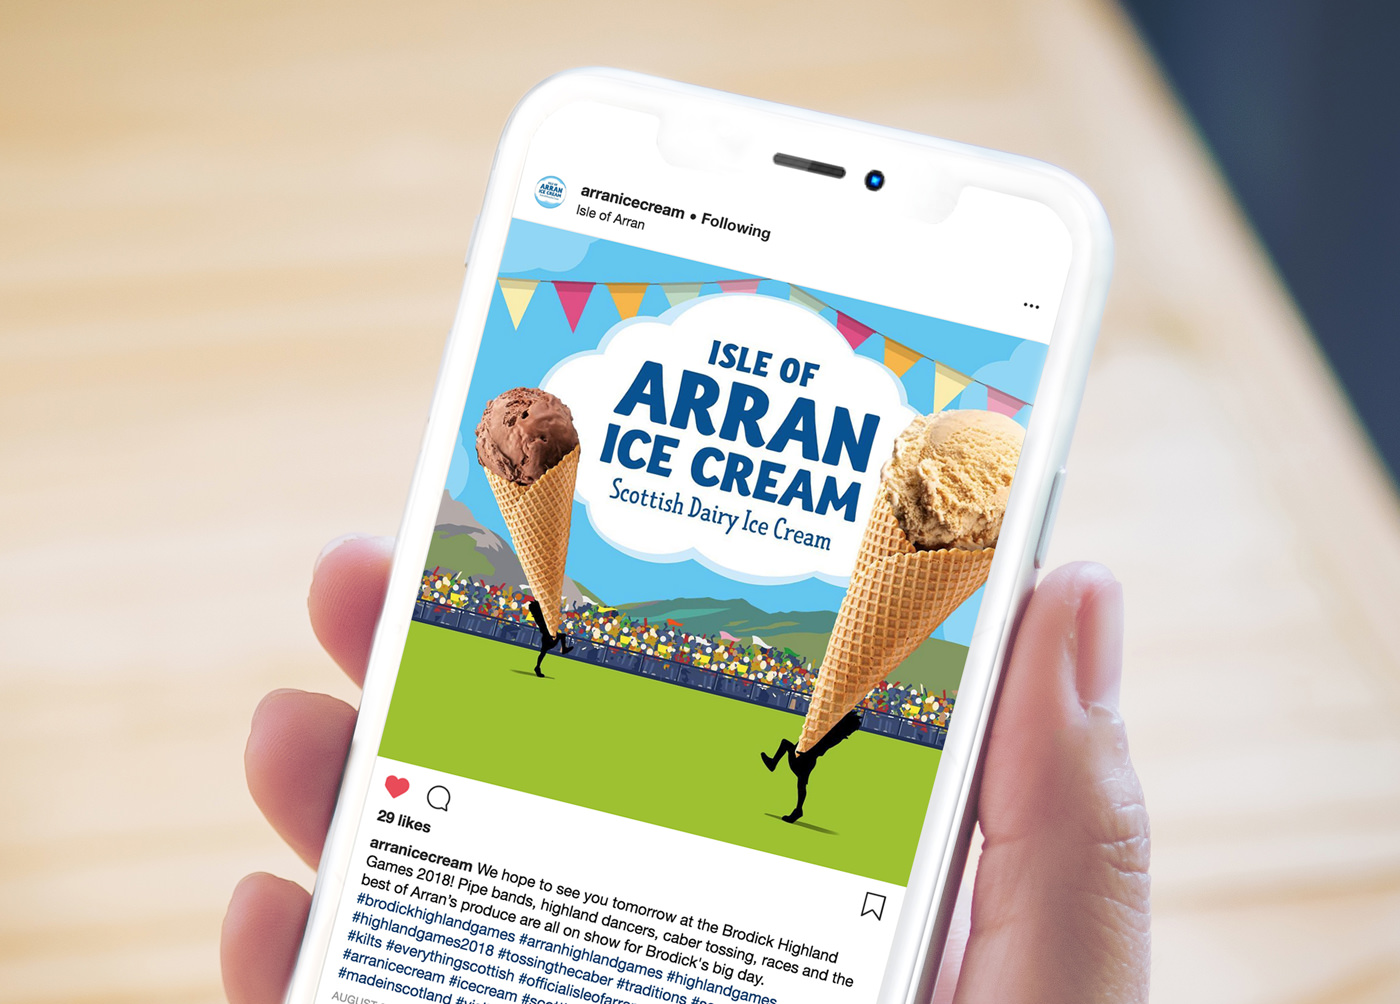 The Arran Ice Cream Instagram feed on a mobile